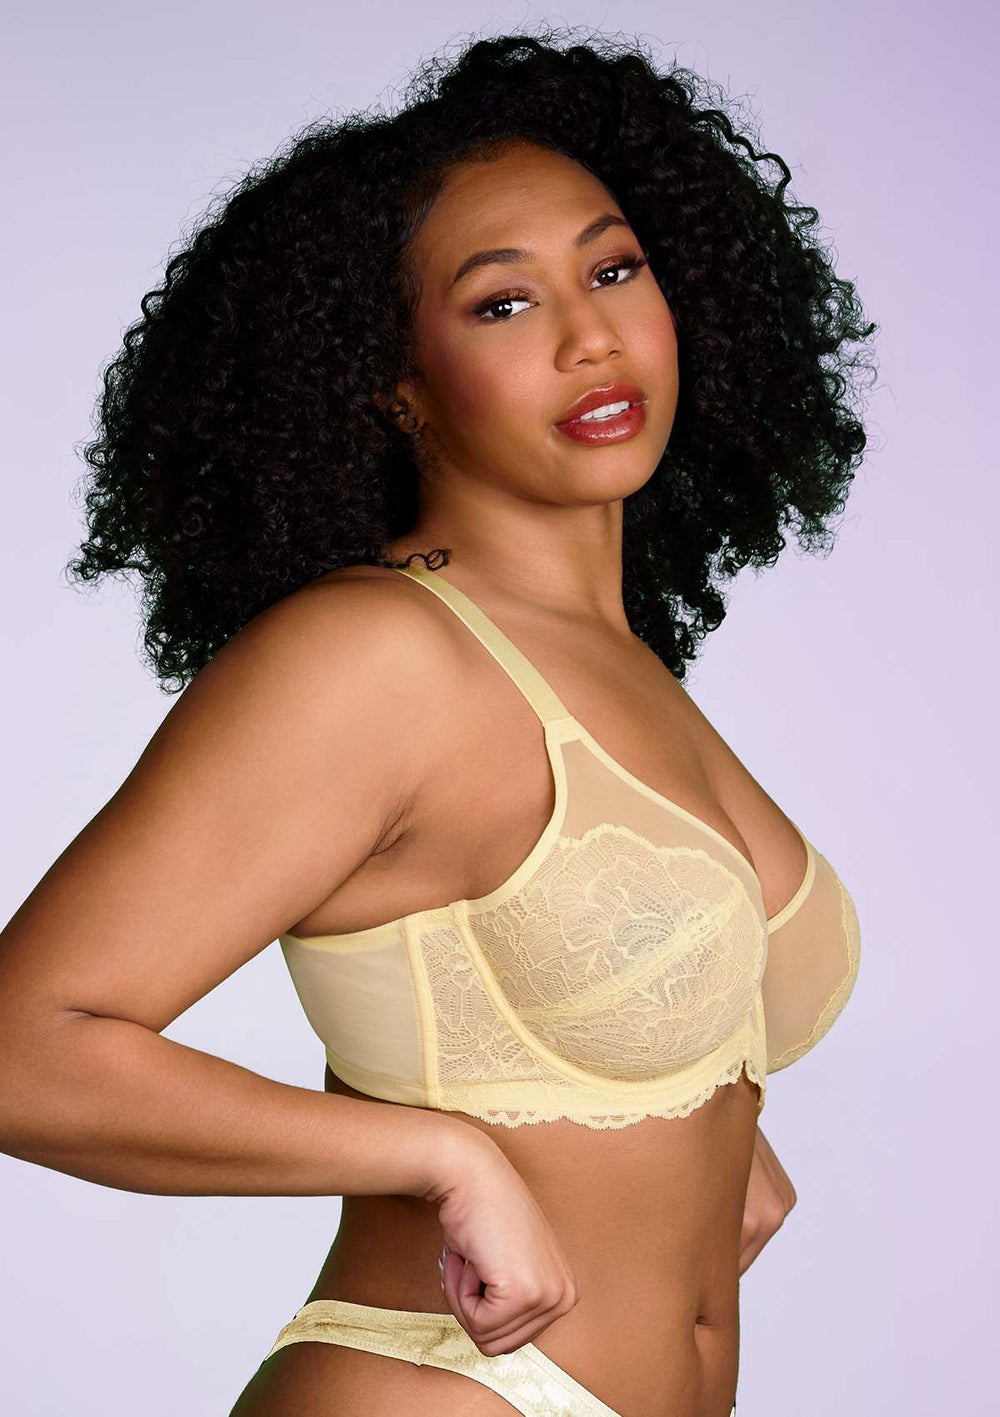 Where is a good place to buy 42DDD bras in-store? - Quora